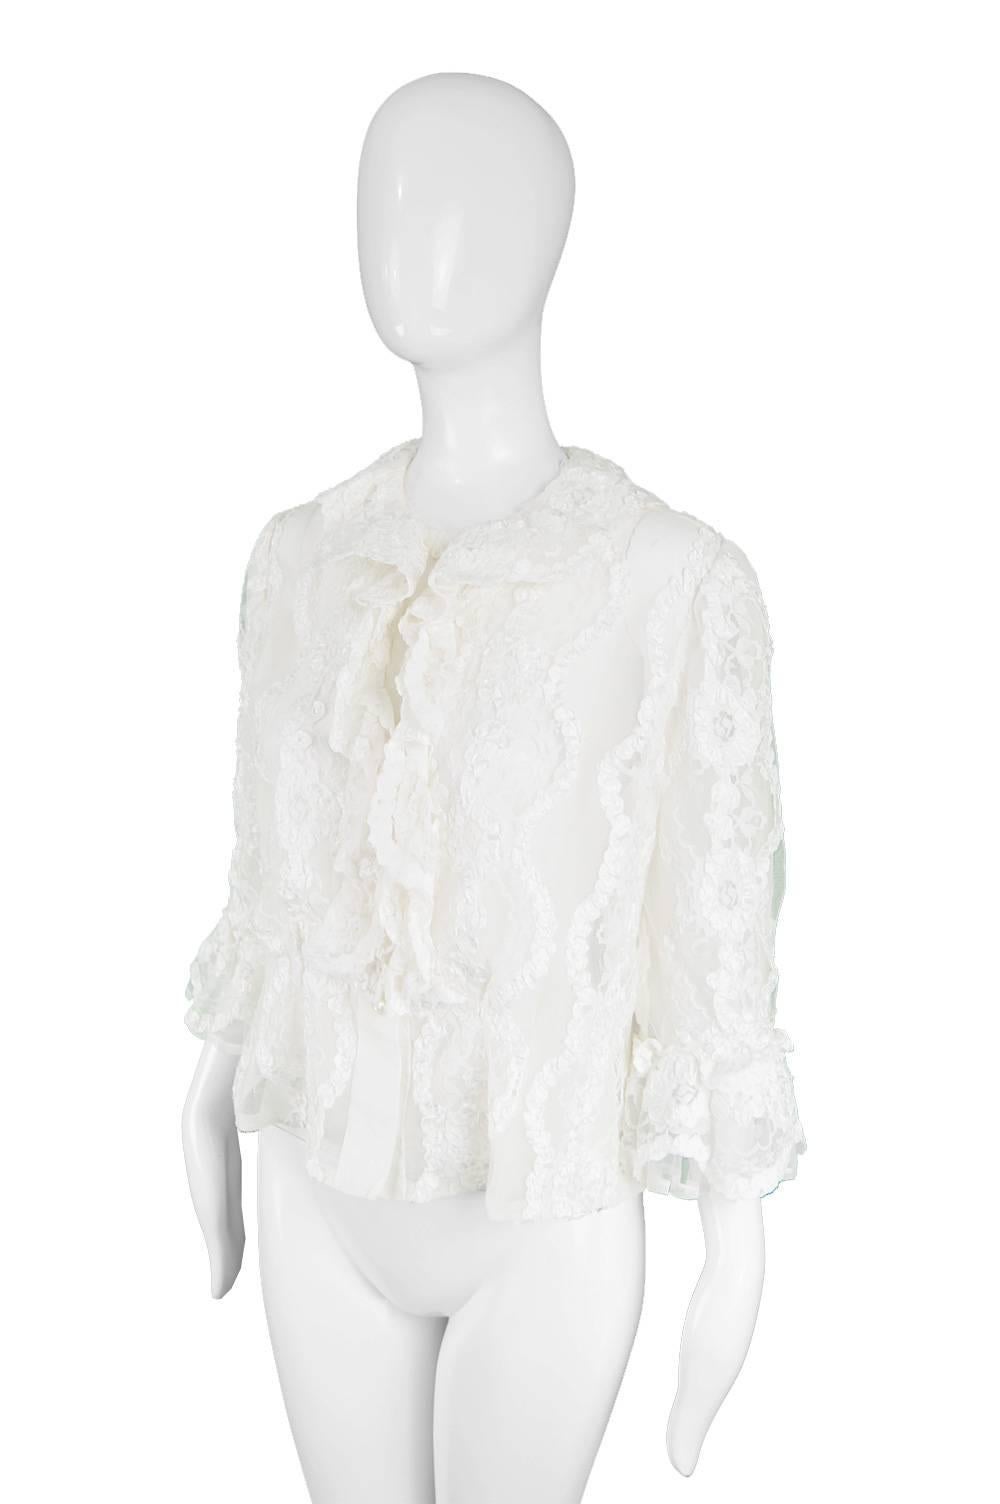 Women's Hardy Amies Couture Vintage White Chantilly Lace Ribbonwork Ruffle Shirt, 1970s For Sale